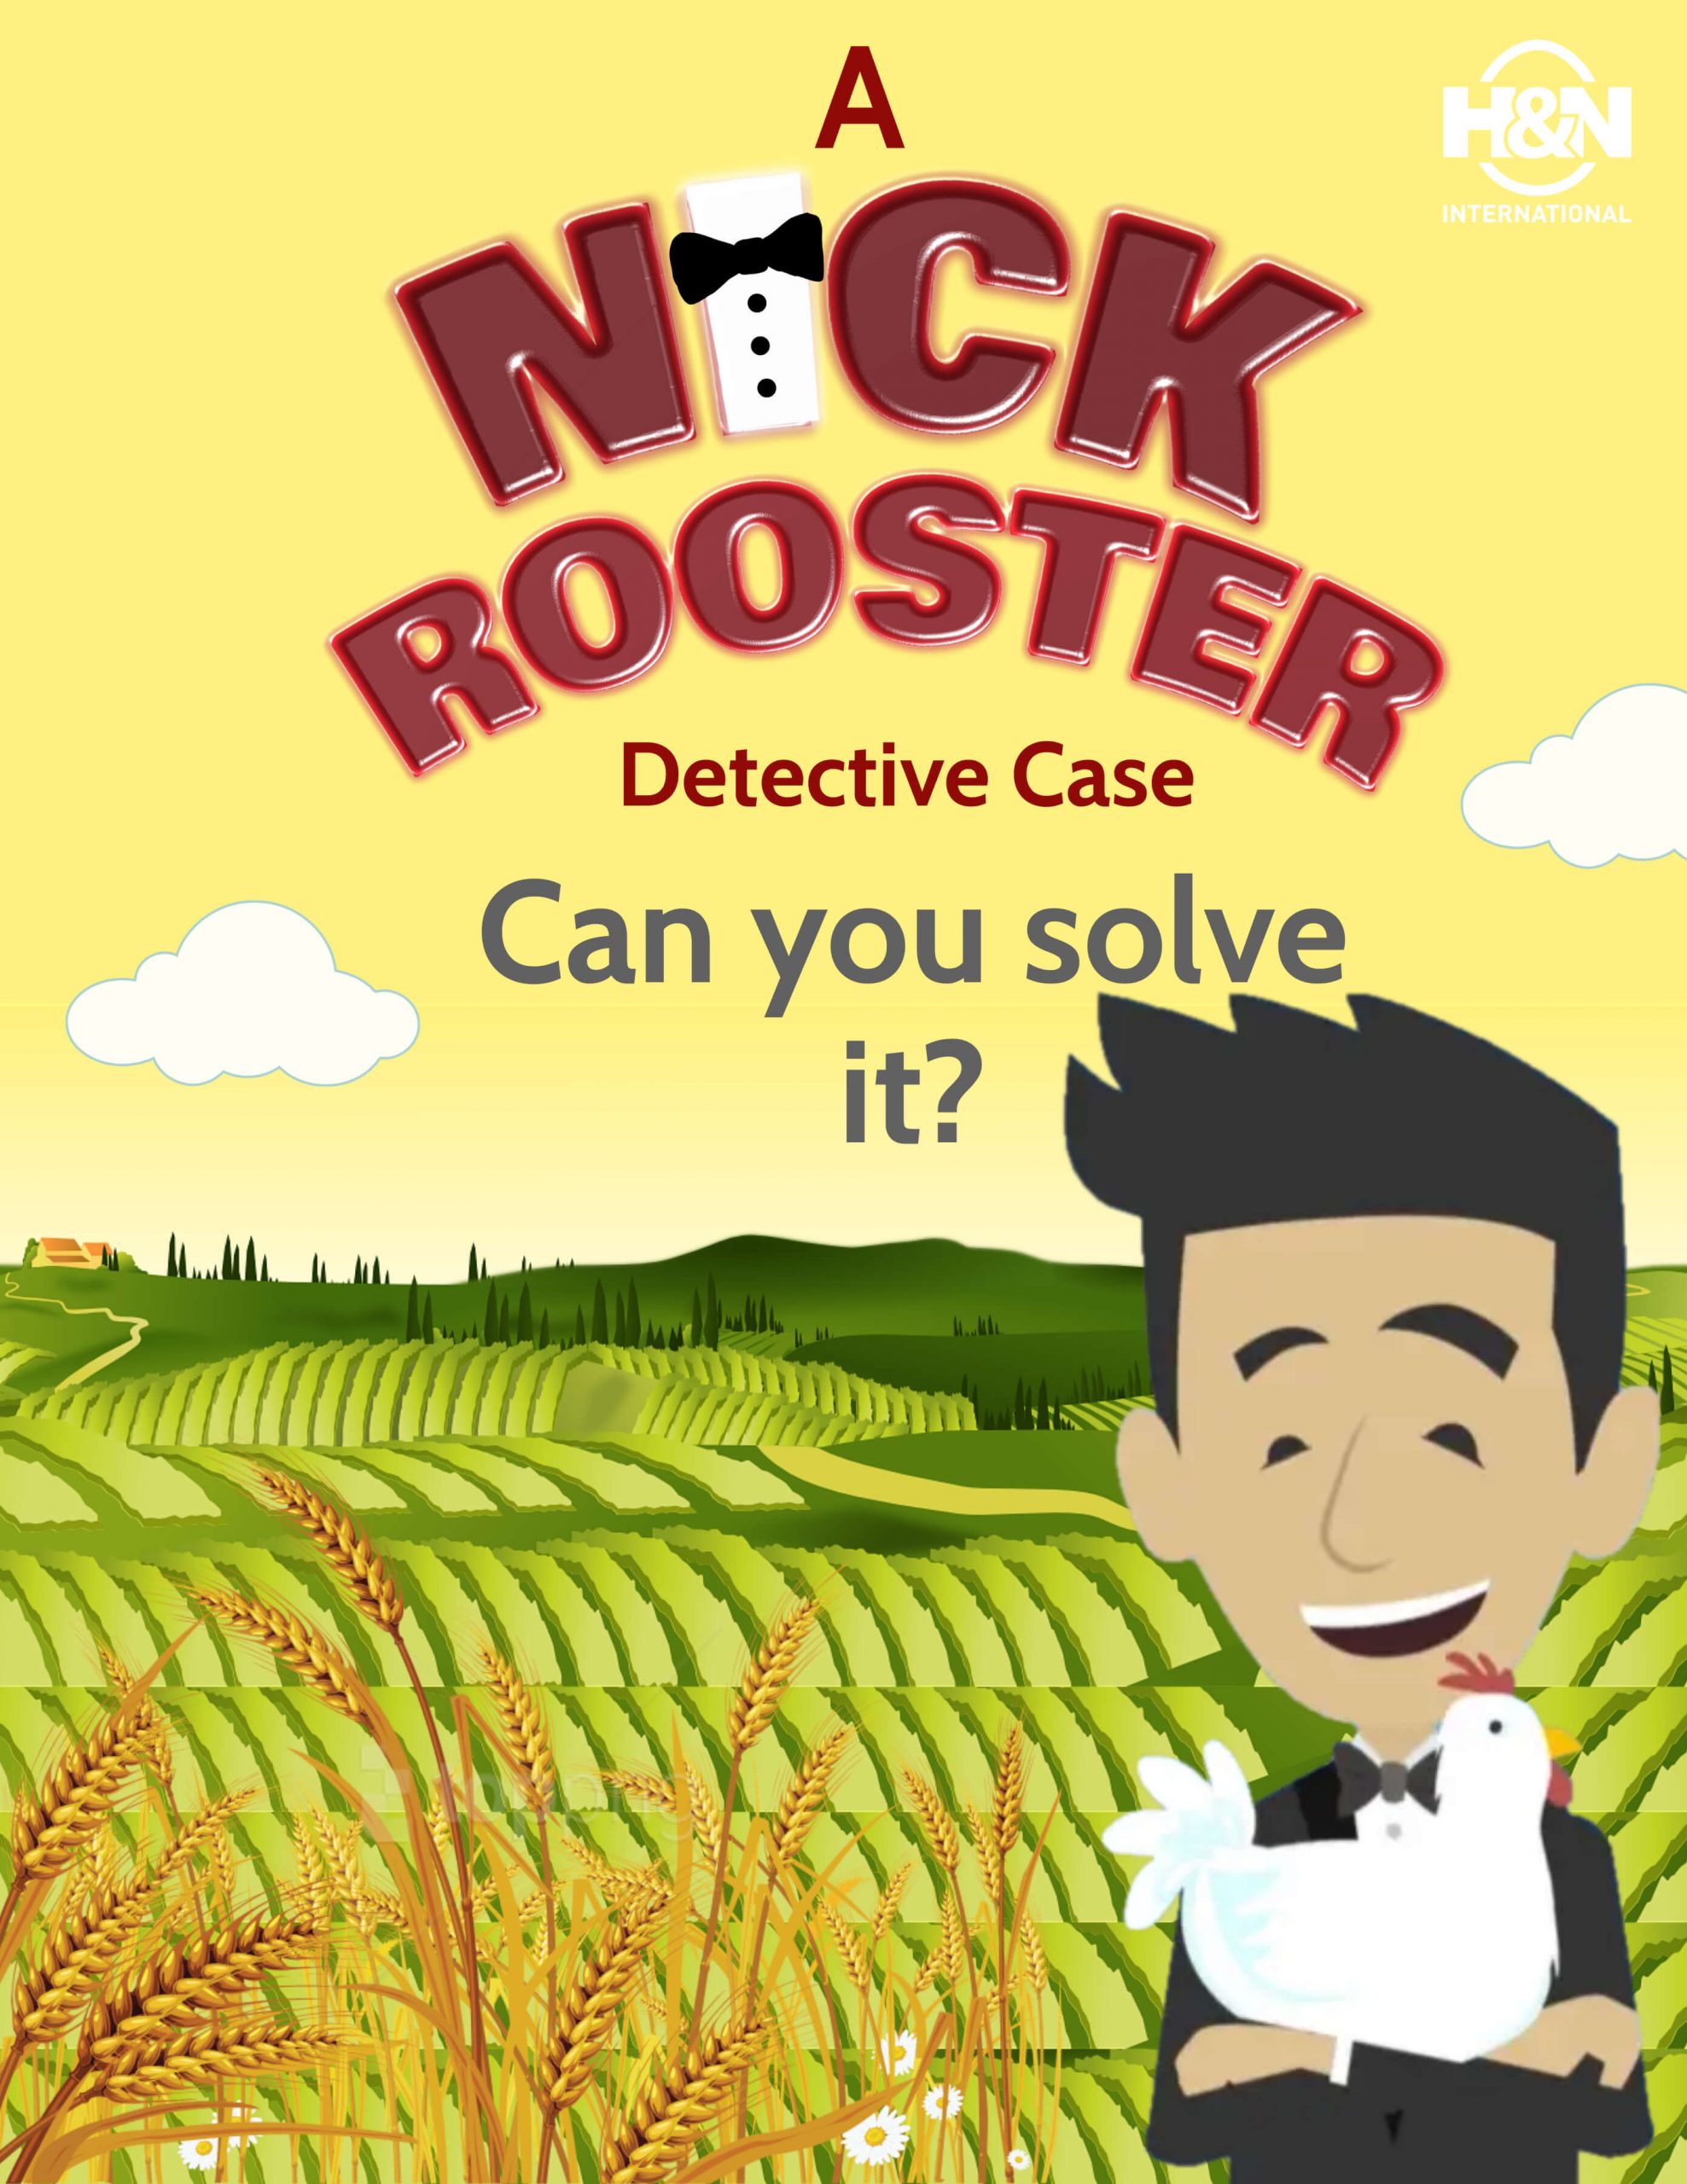 Nick Rooster case no. 5